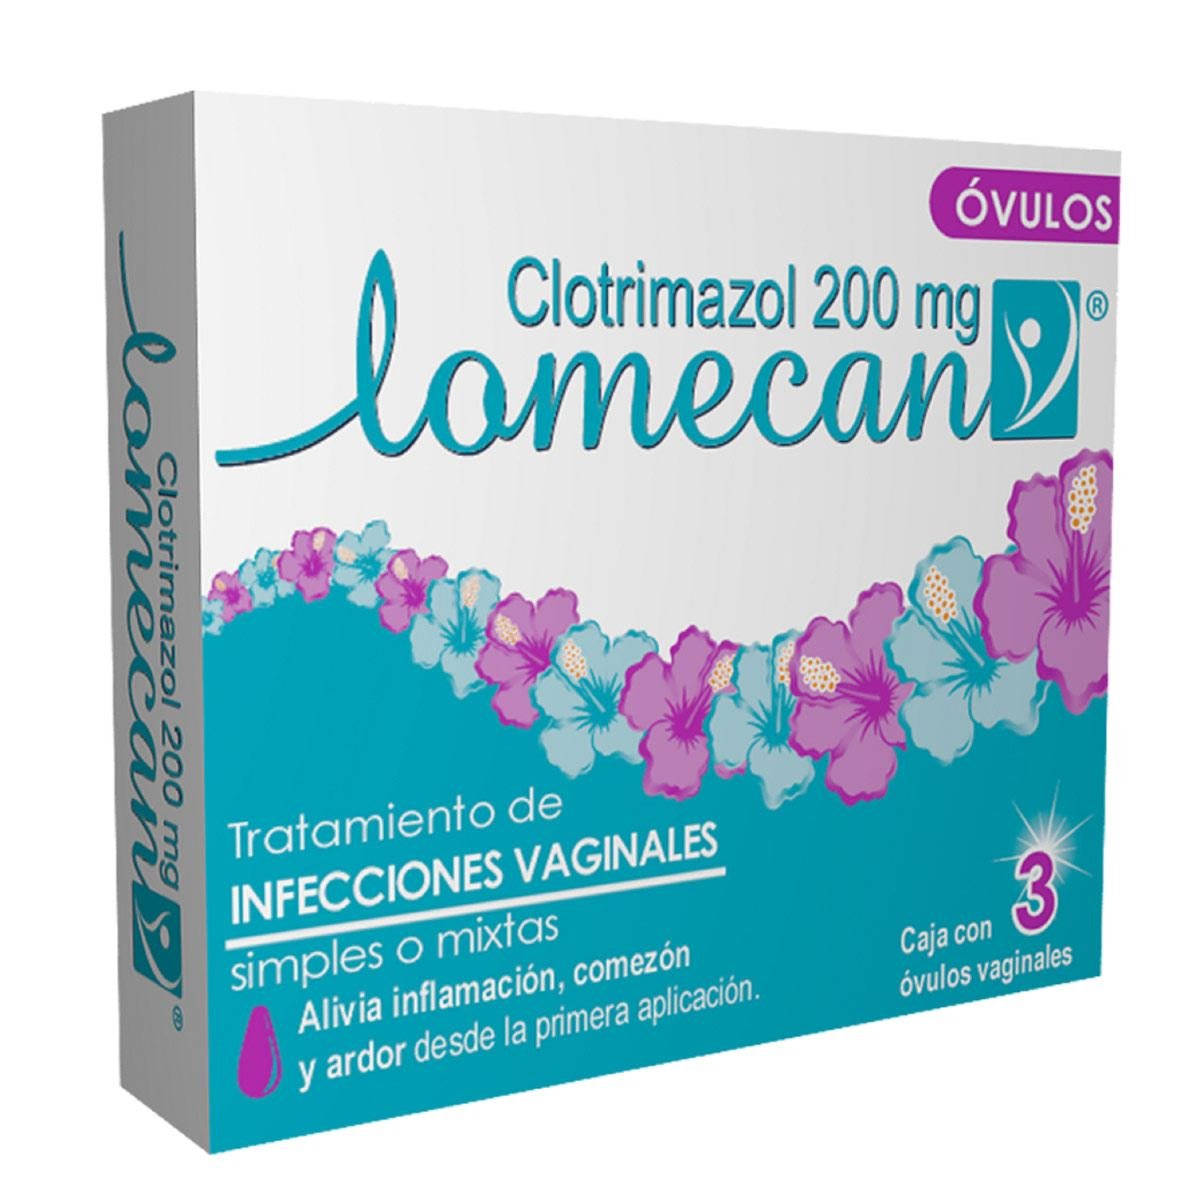 Lomecan Ovulos Img Floral E-10